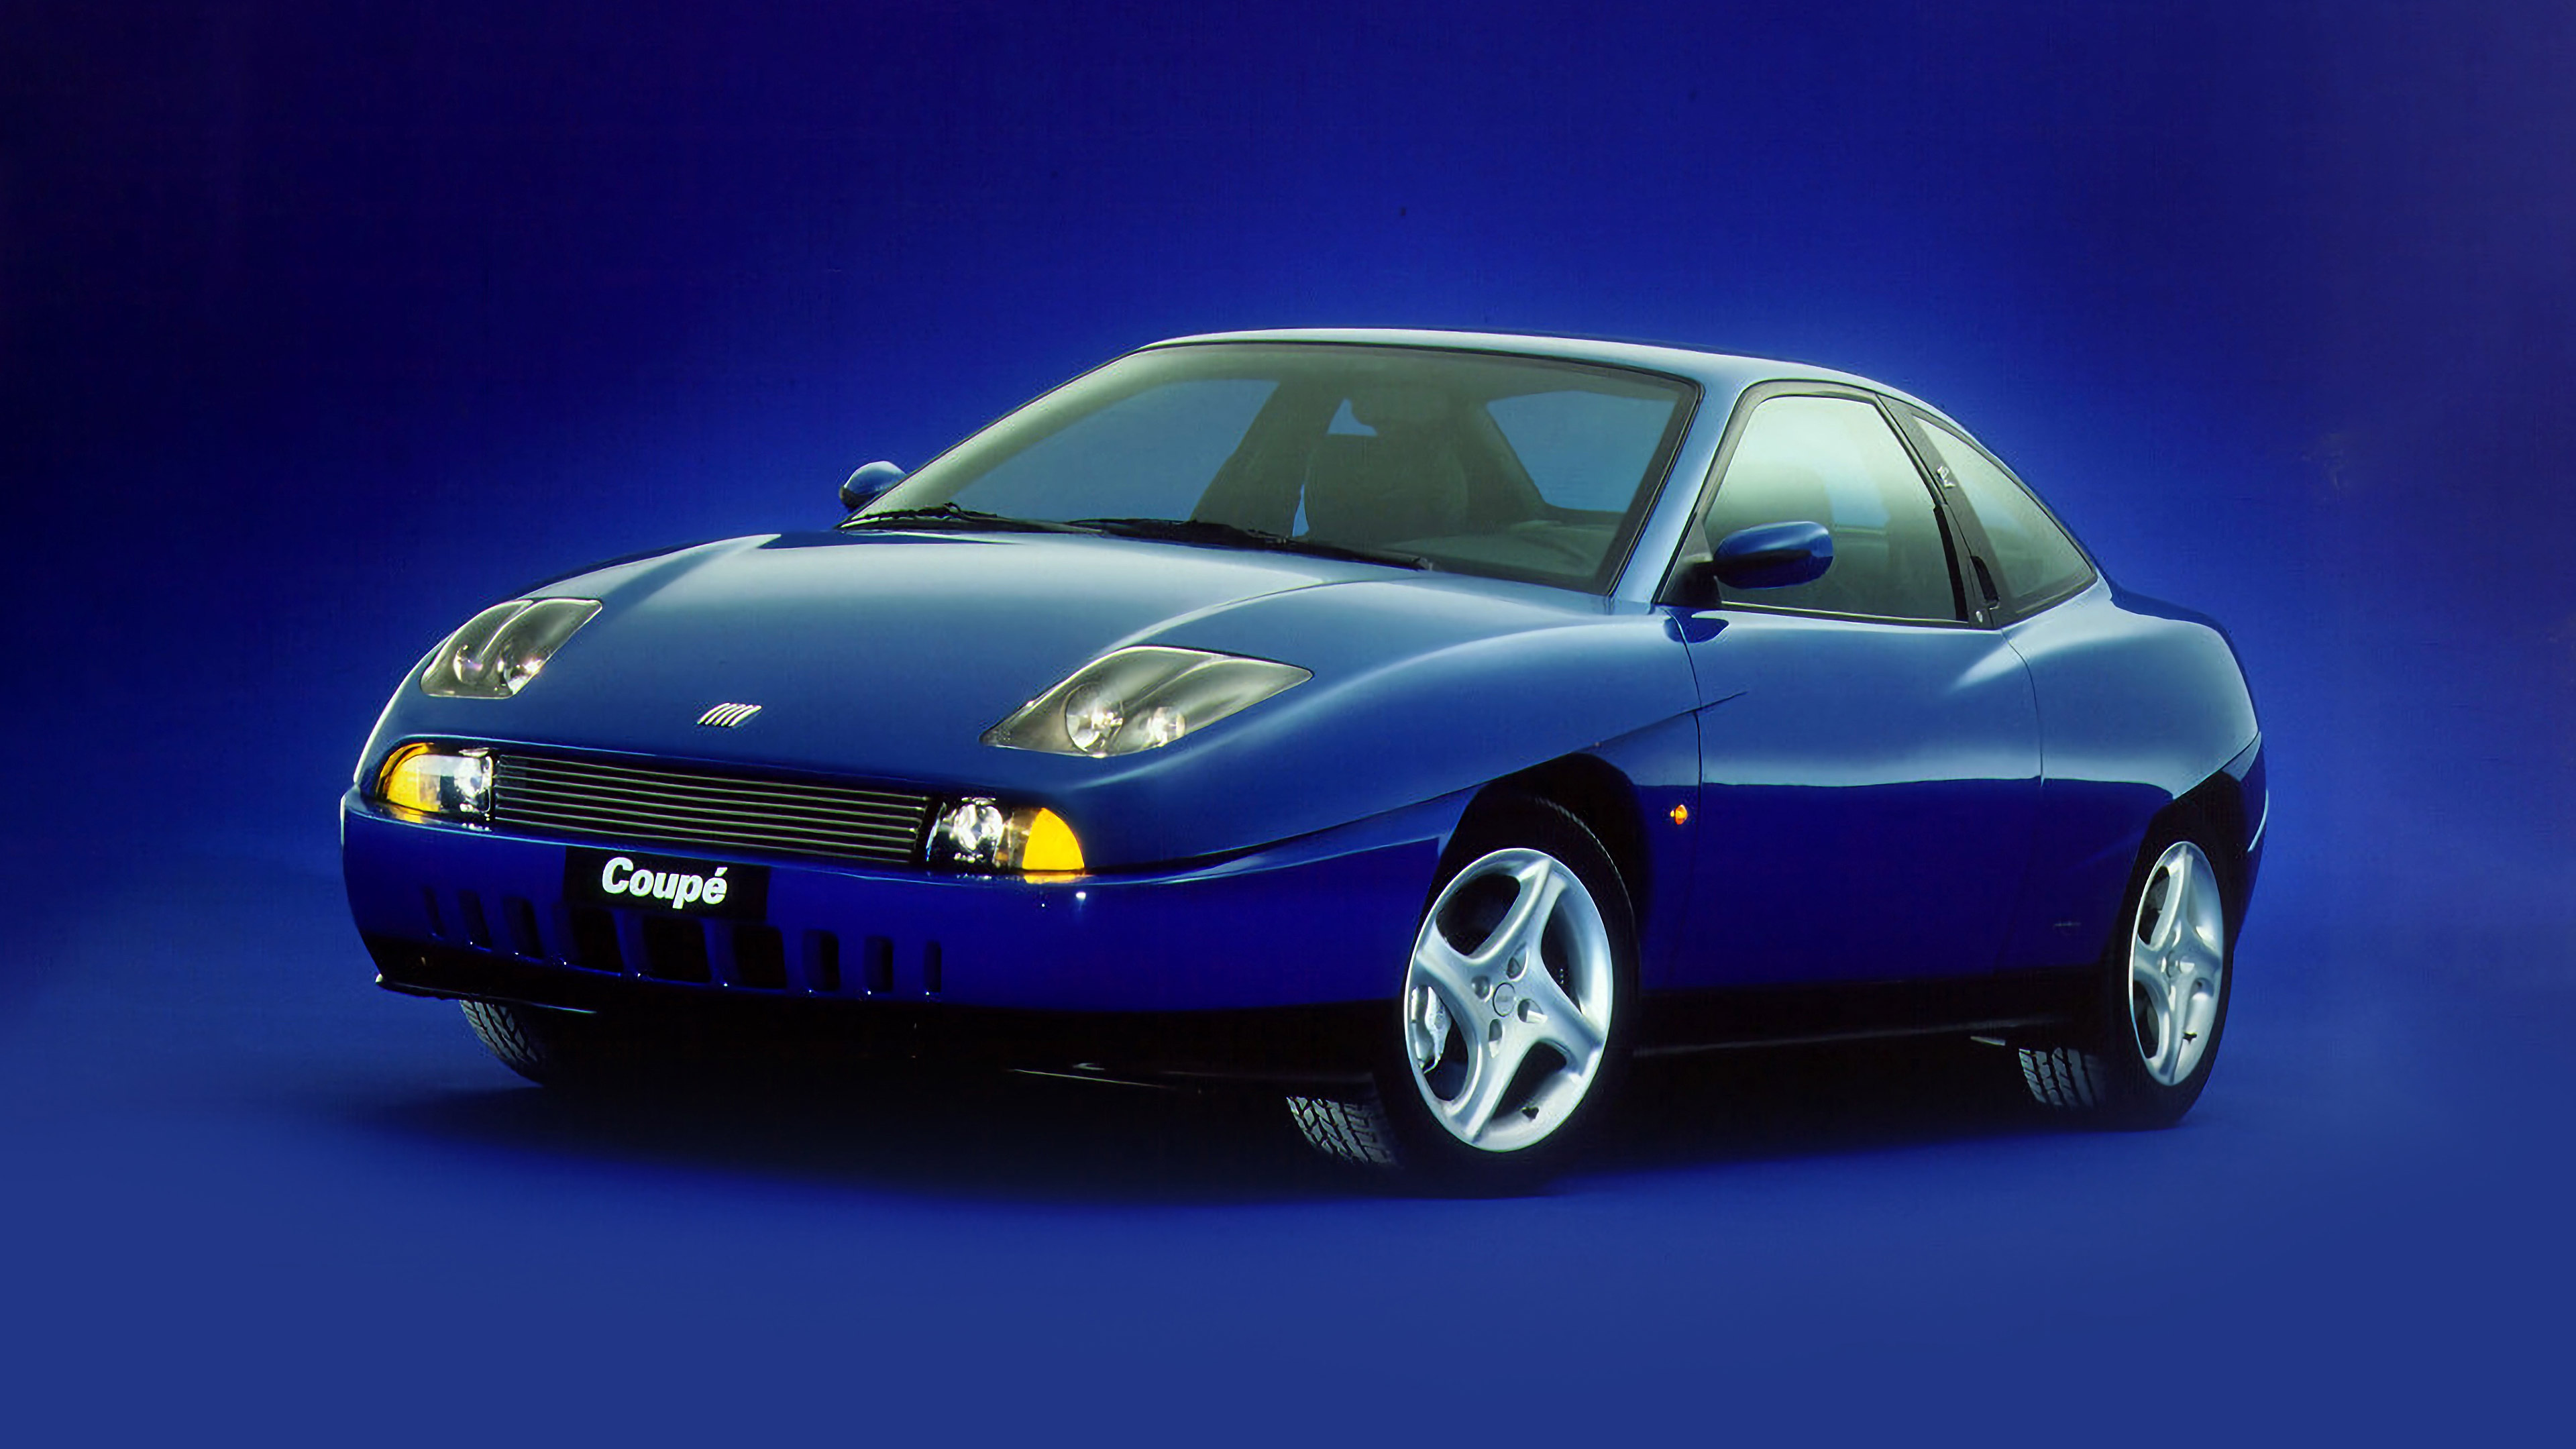  1995 Fiat Coupe Wallpaper.